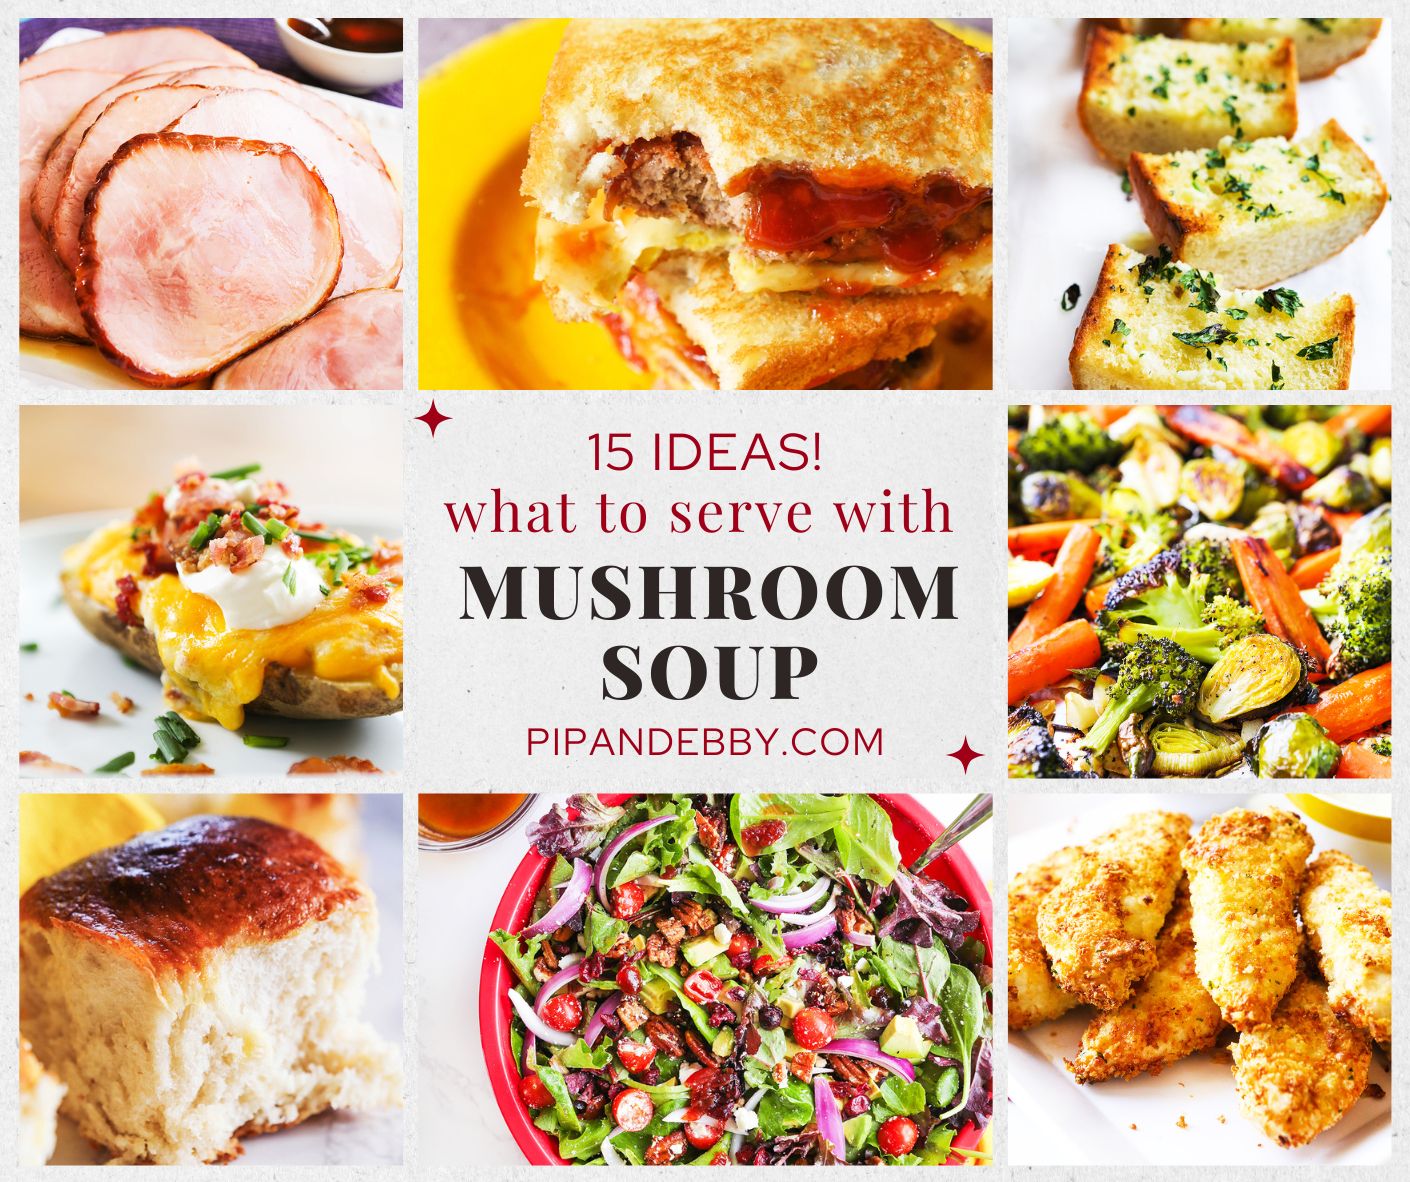 Eight food photos in a grid with text reading, "15 ideas! What to serve with mushroom soup."